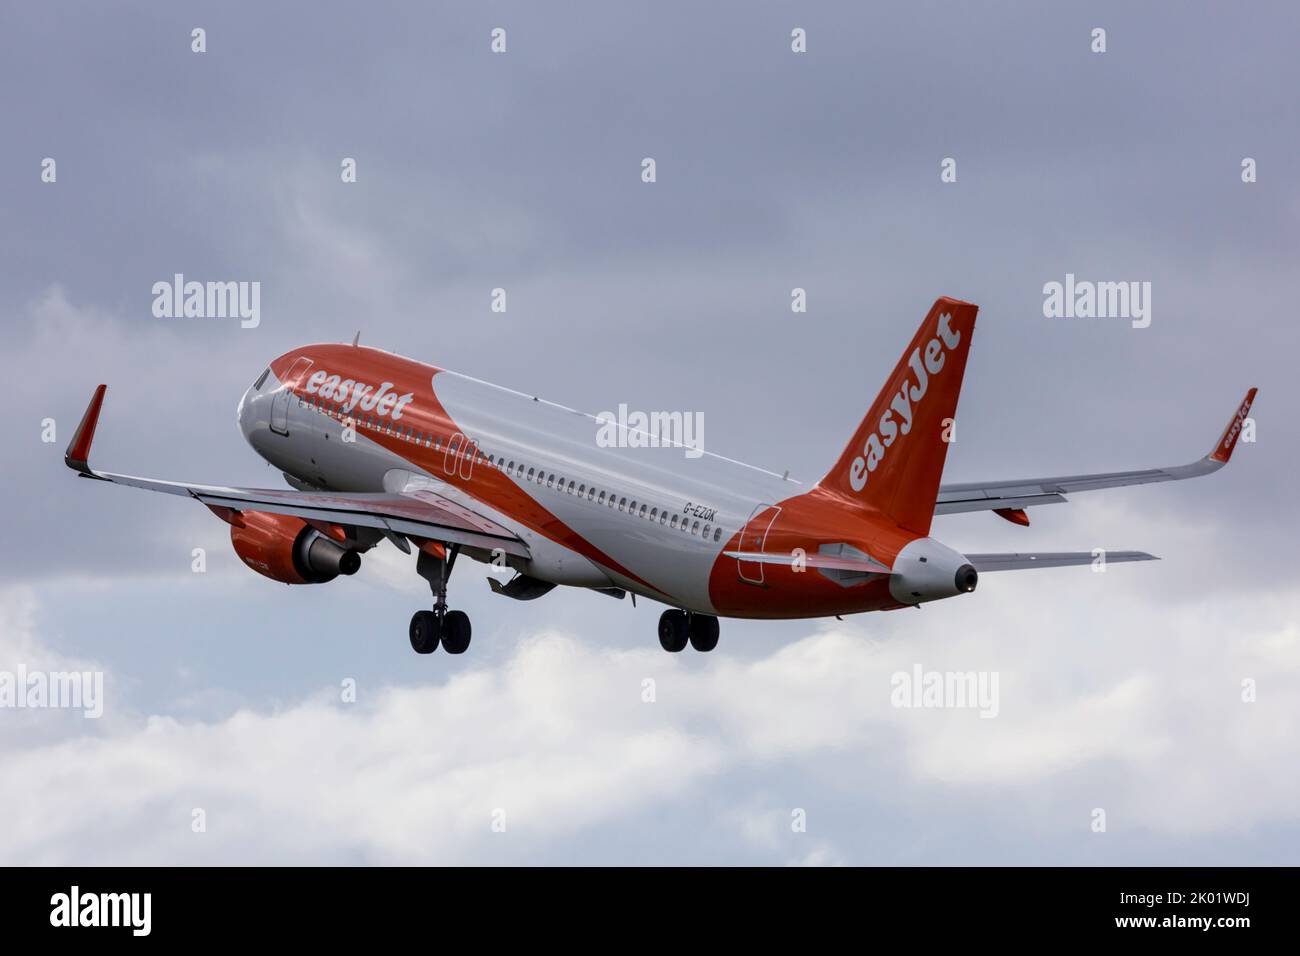 An Easyjet Airbus A320-200 Airliner, serial number G-EZOK, taking off from Bristol Lulsgate Airport in England. Stock Photo